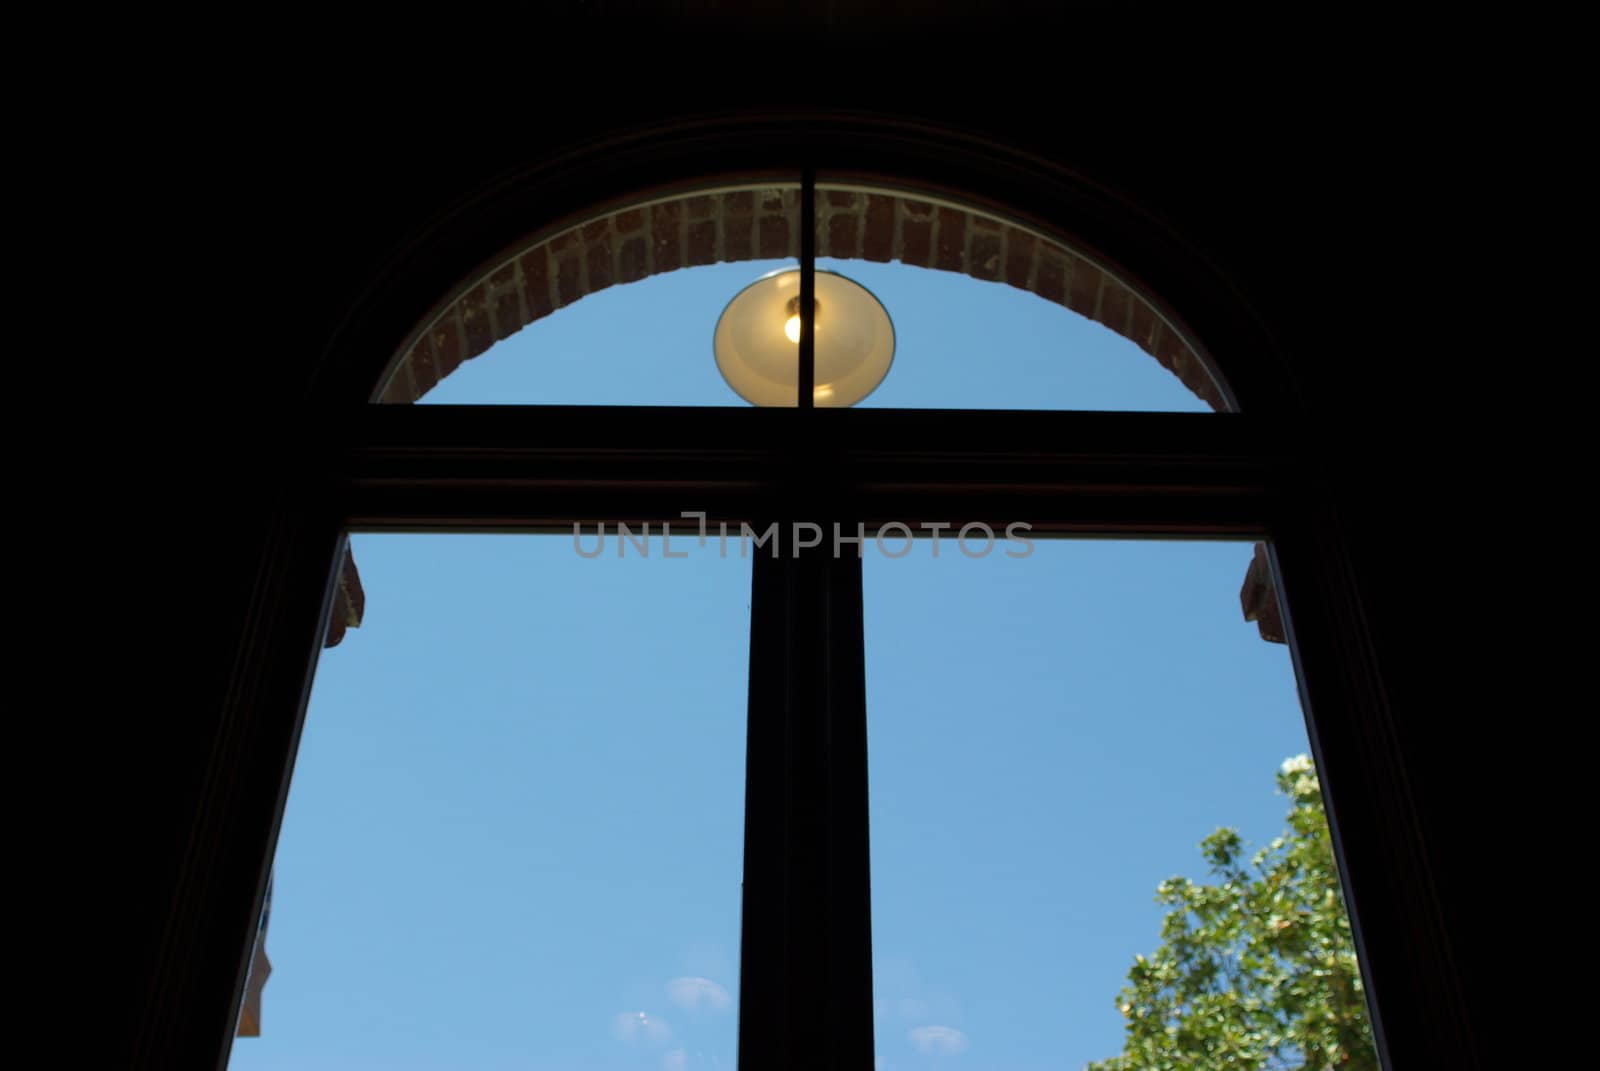 A view looking outside through an arched window in a dark room.